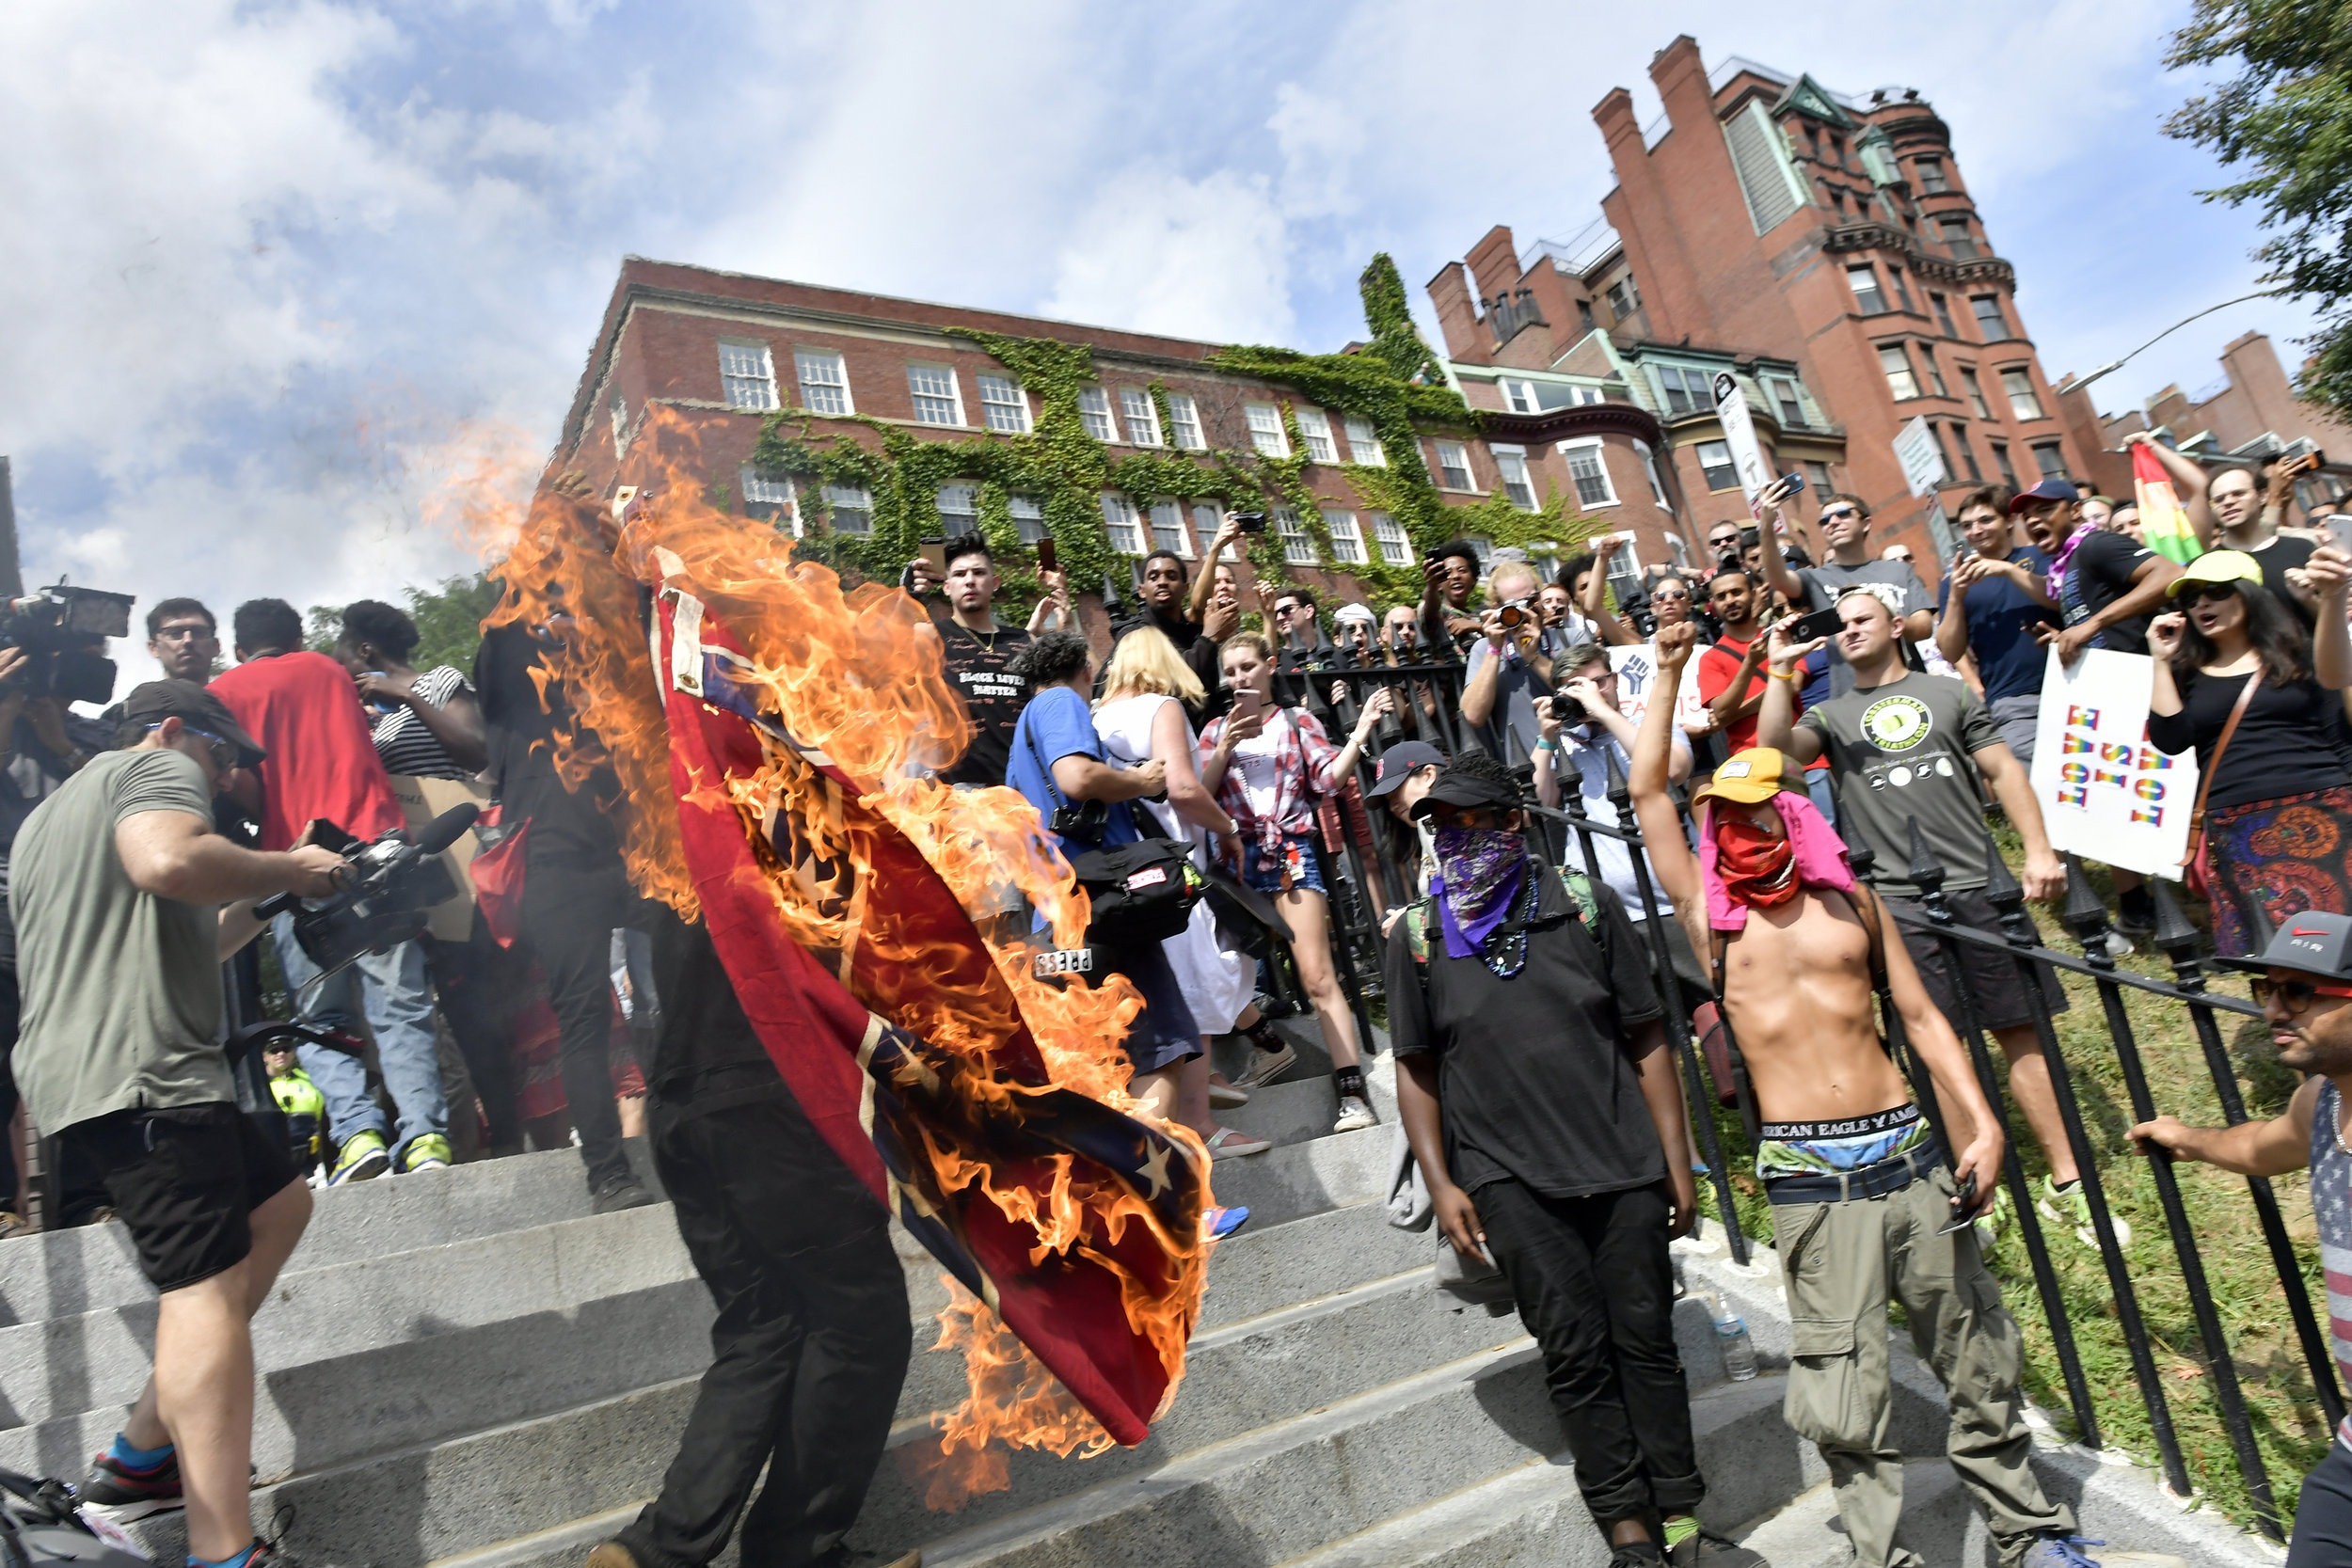  BOSTON, MA Saturday, August 19, 2017 -- Tens of thousands of demonstrators turned out to protest the Boston Free Speech Rally on Boston Common. 